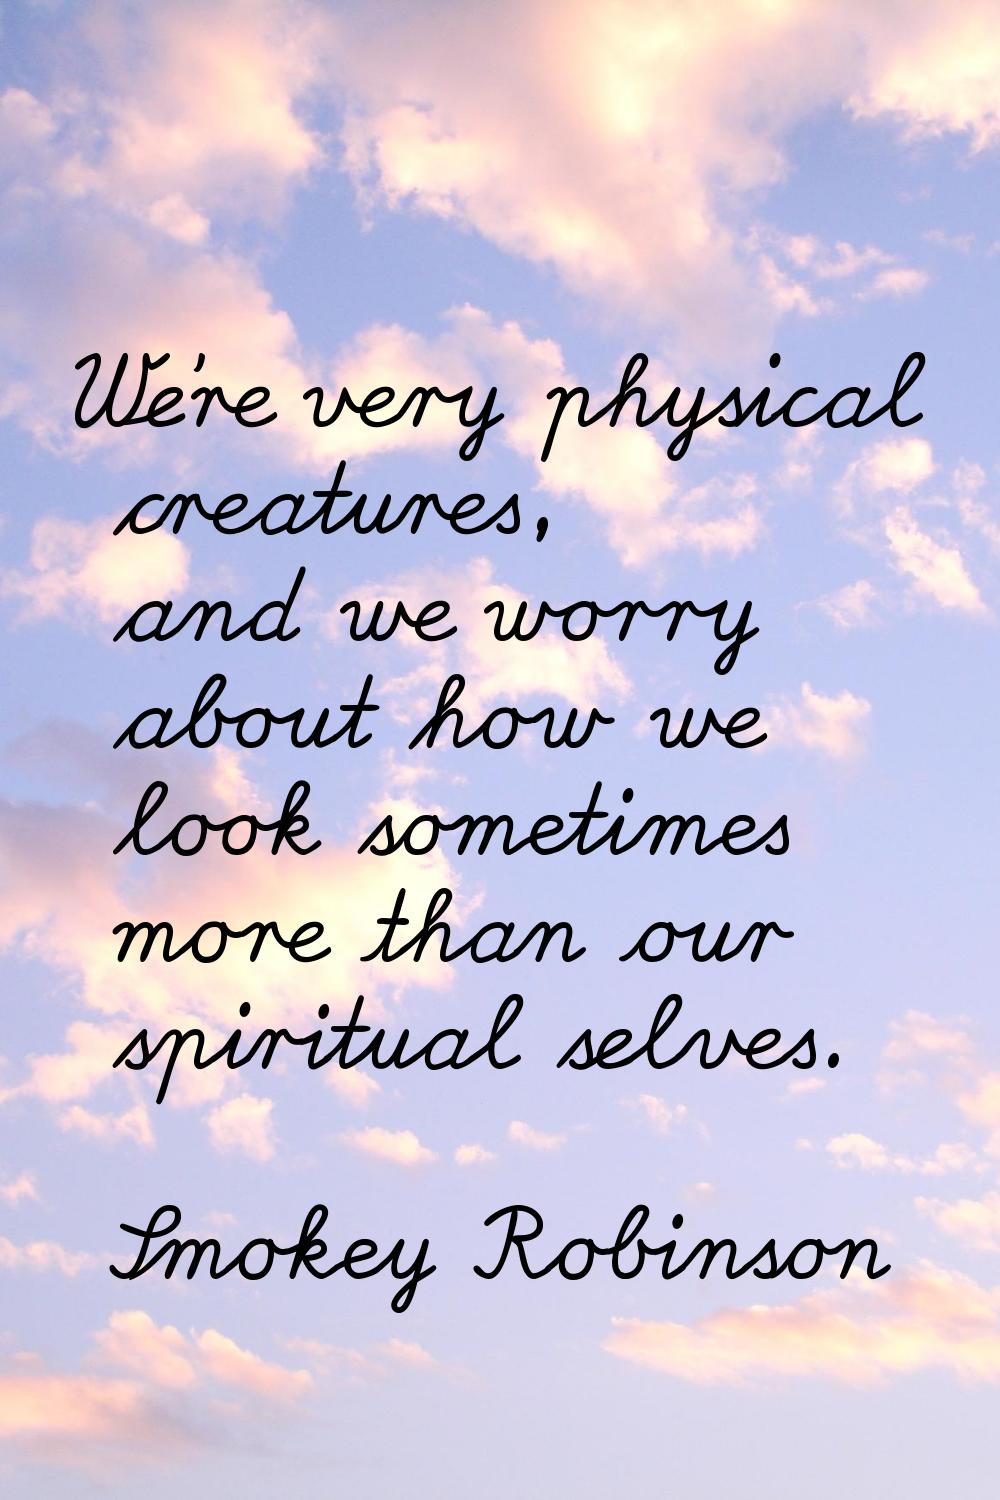 We're very physical creatures, and we worry about how we look sometimes more than our spiritual sel